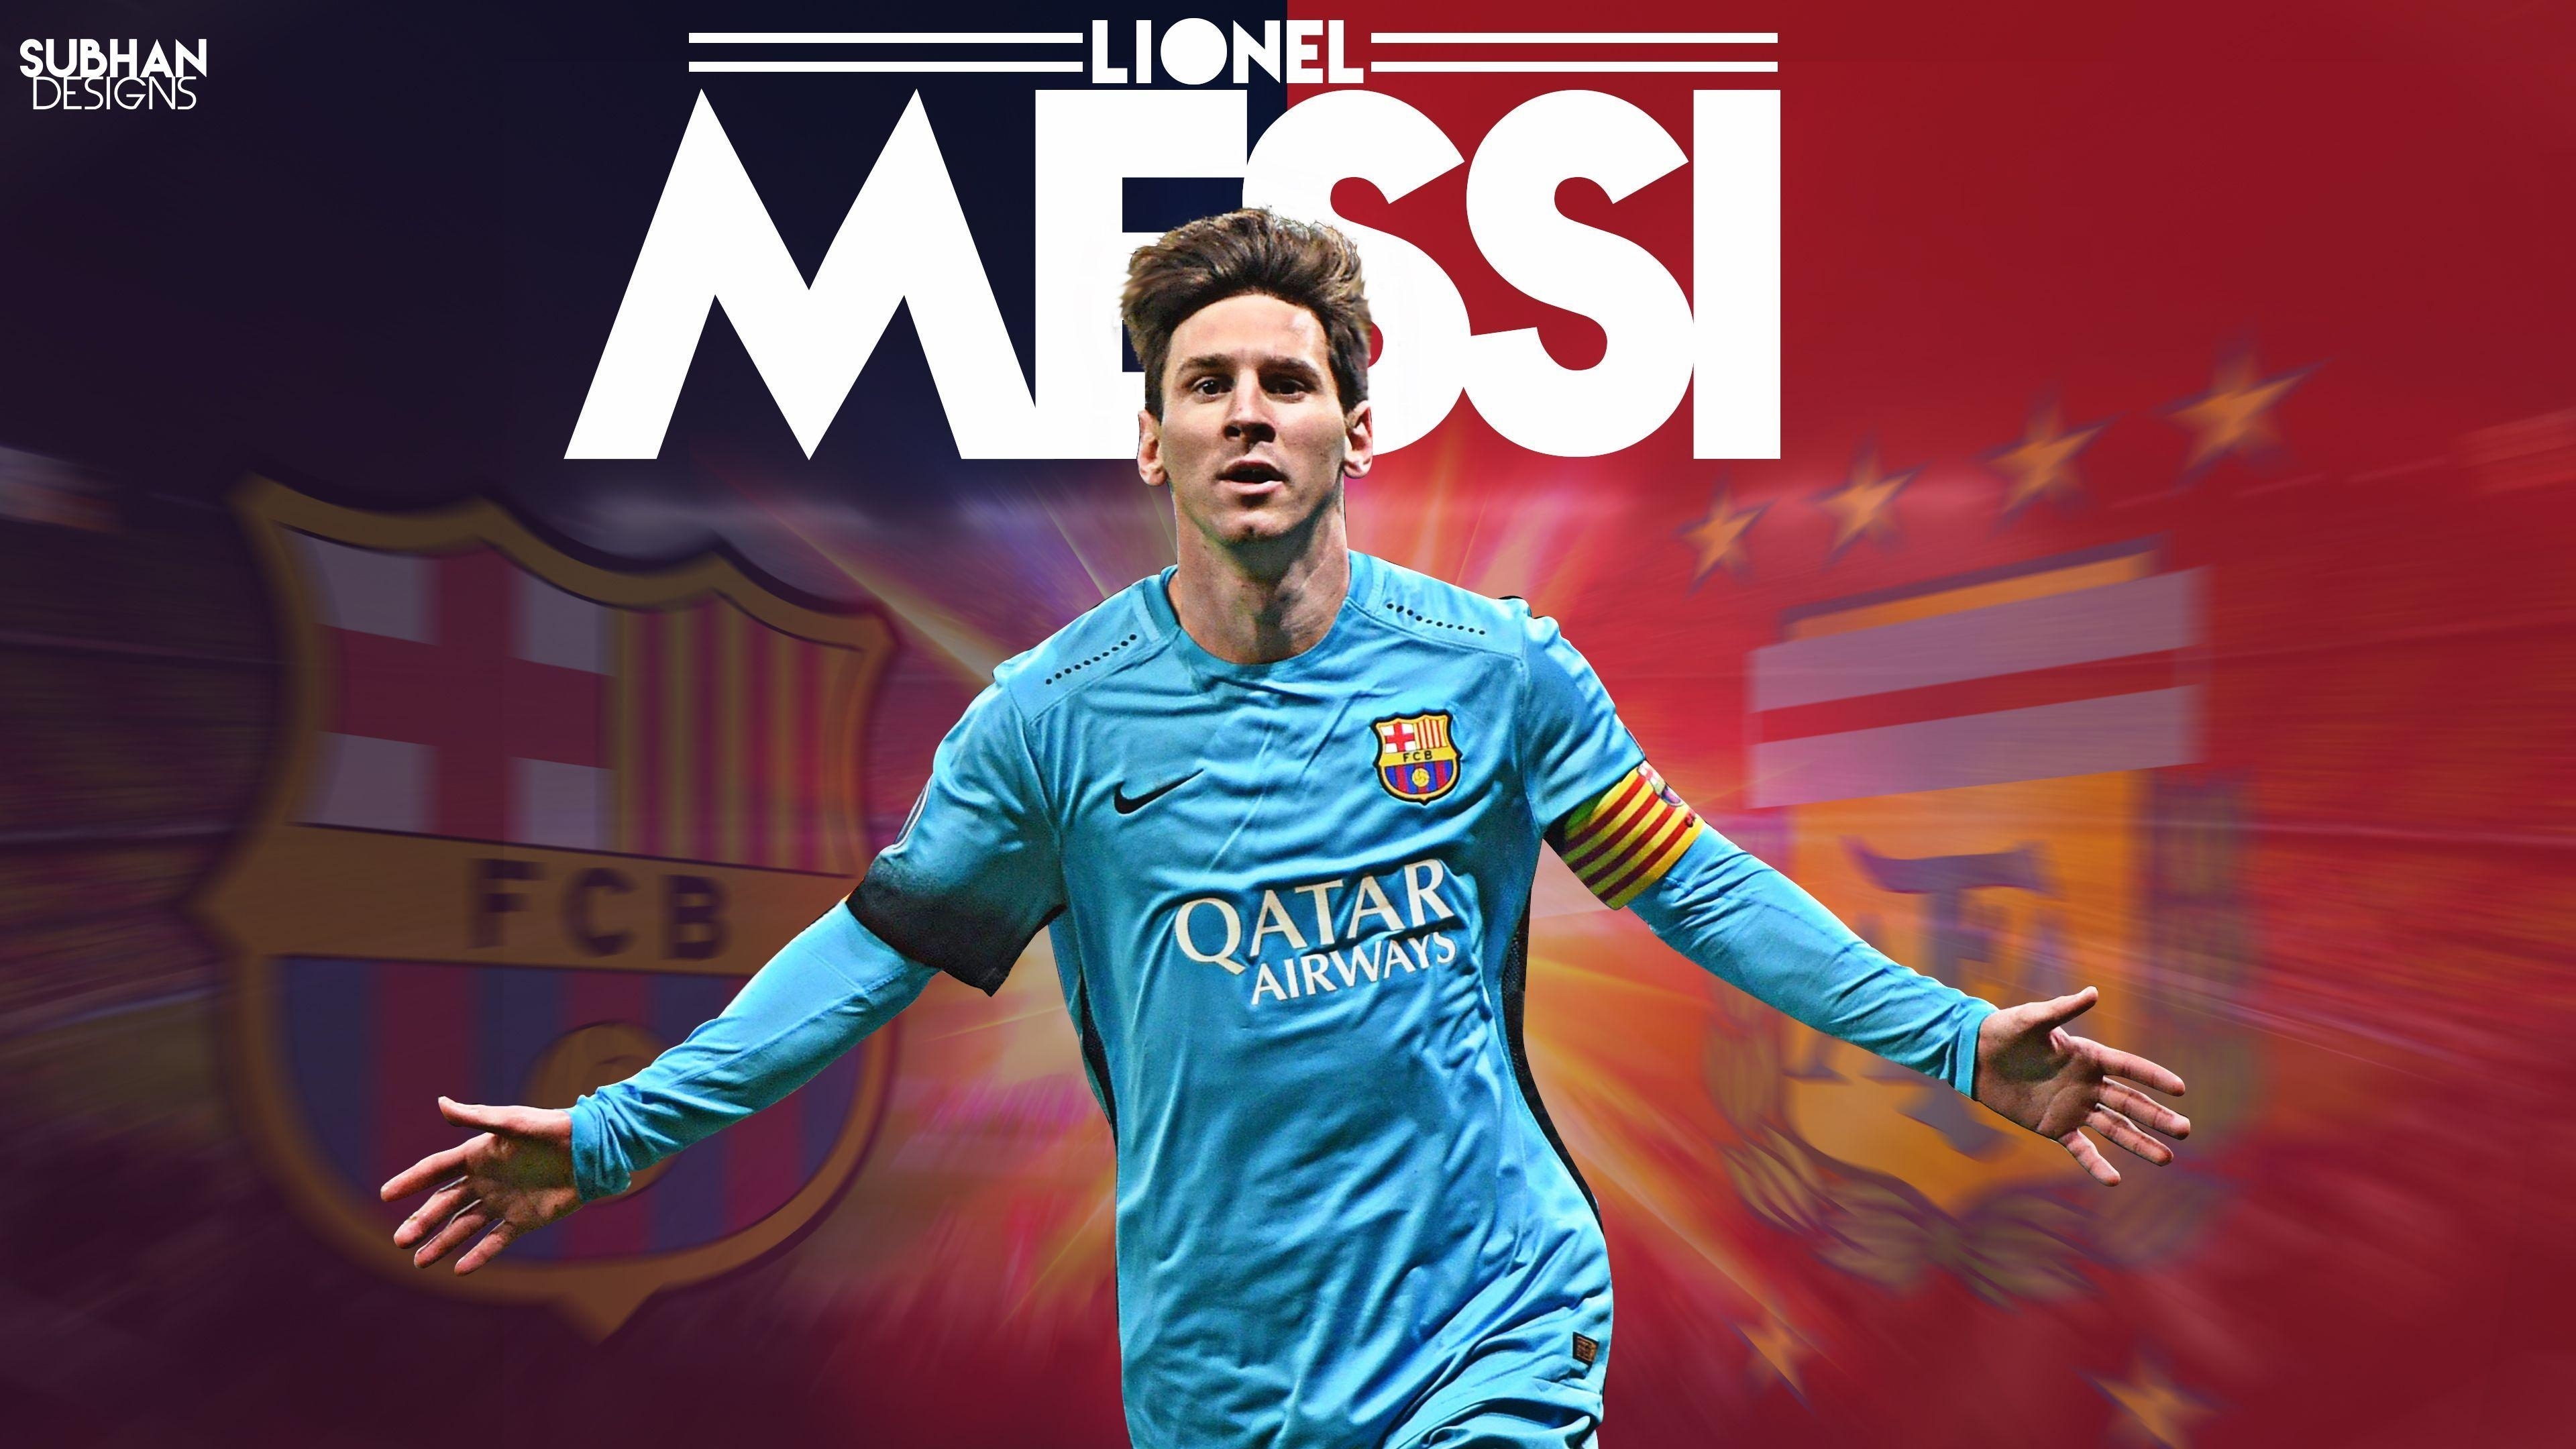 lionel messi wallpapers 2016 - wallpaper cave